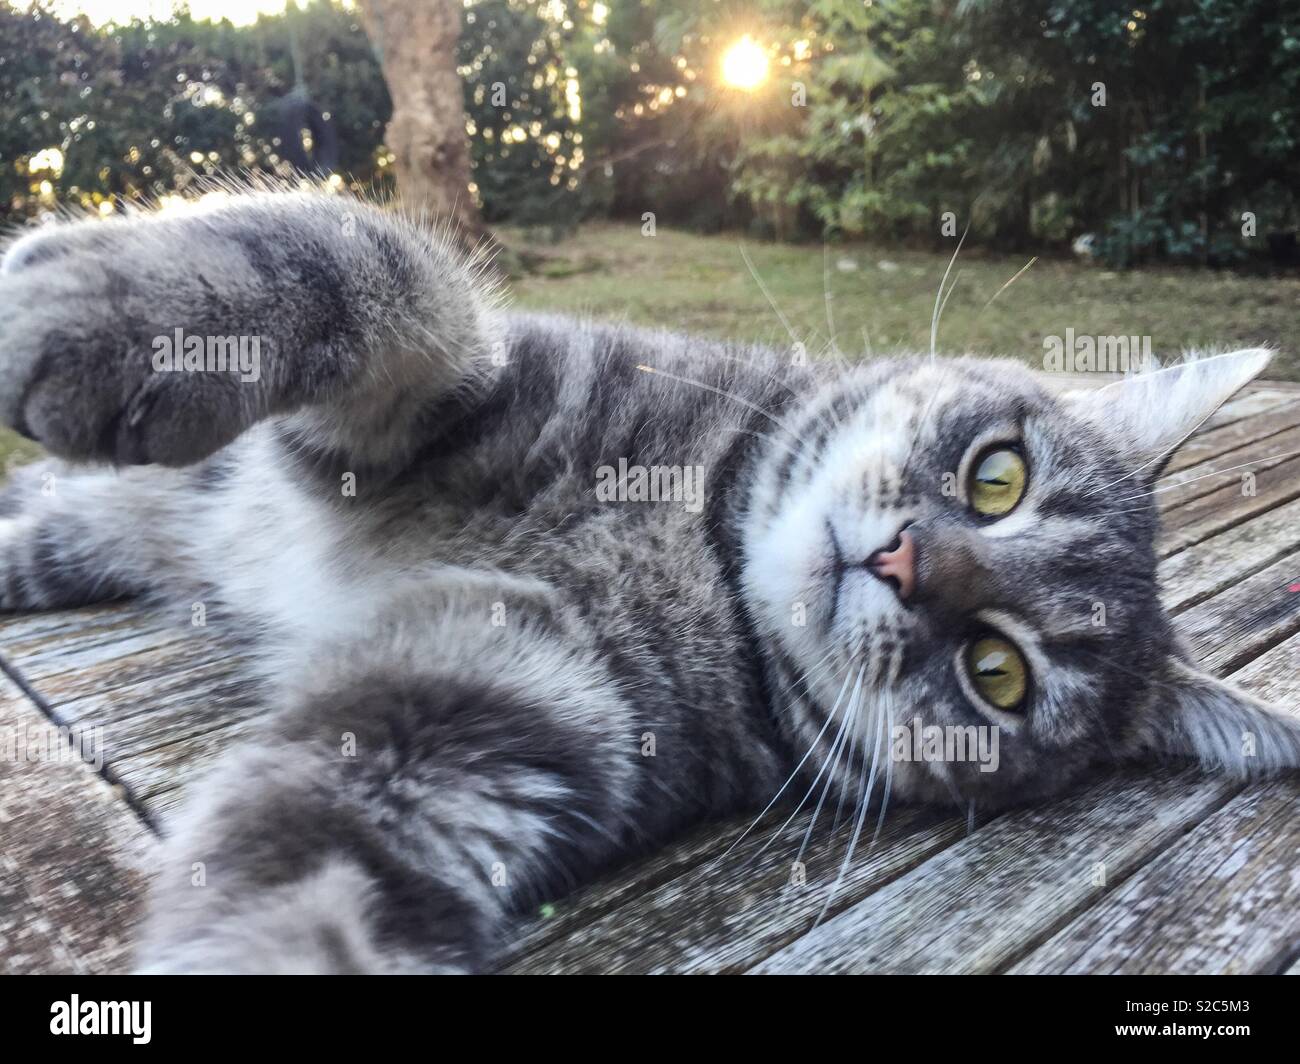 Cat laying down on a table in the garden. Stock Photo